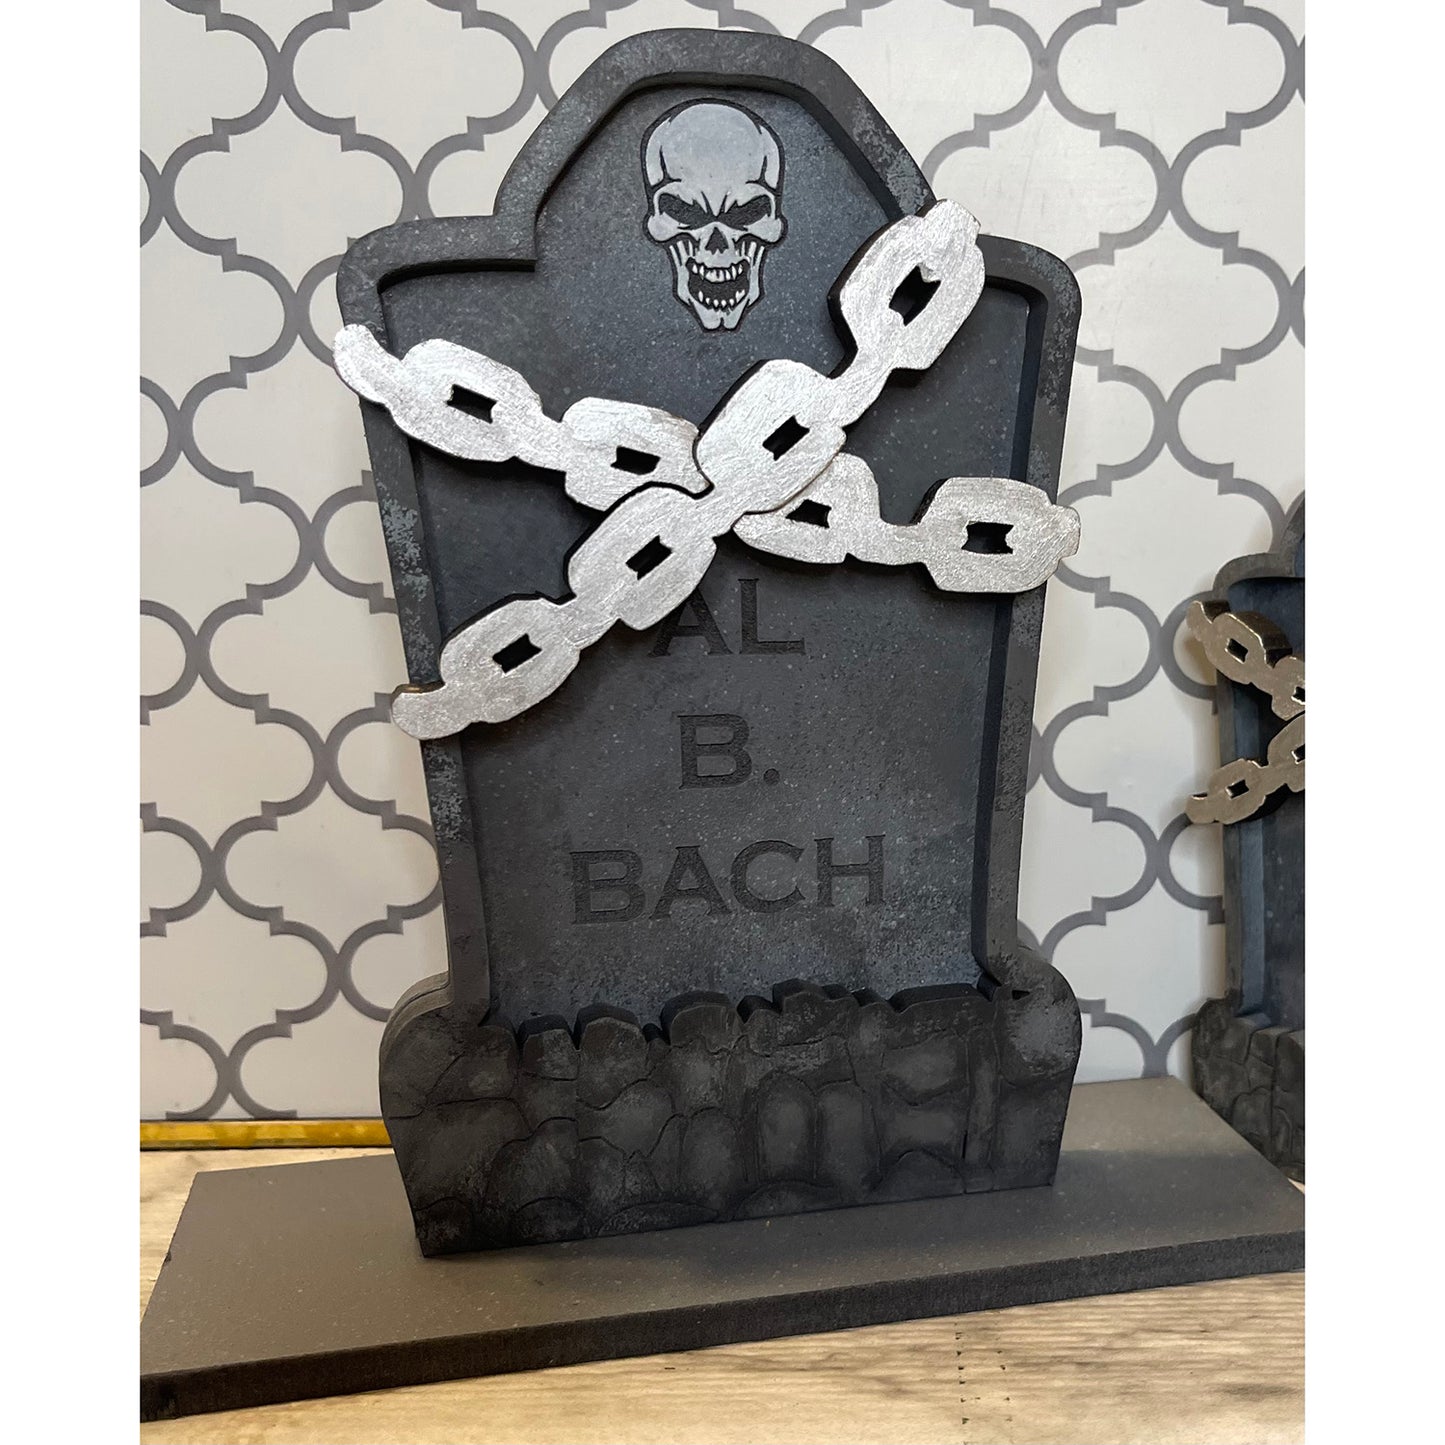 Halloween Silly Tombstones Al B. Bach (Large)